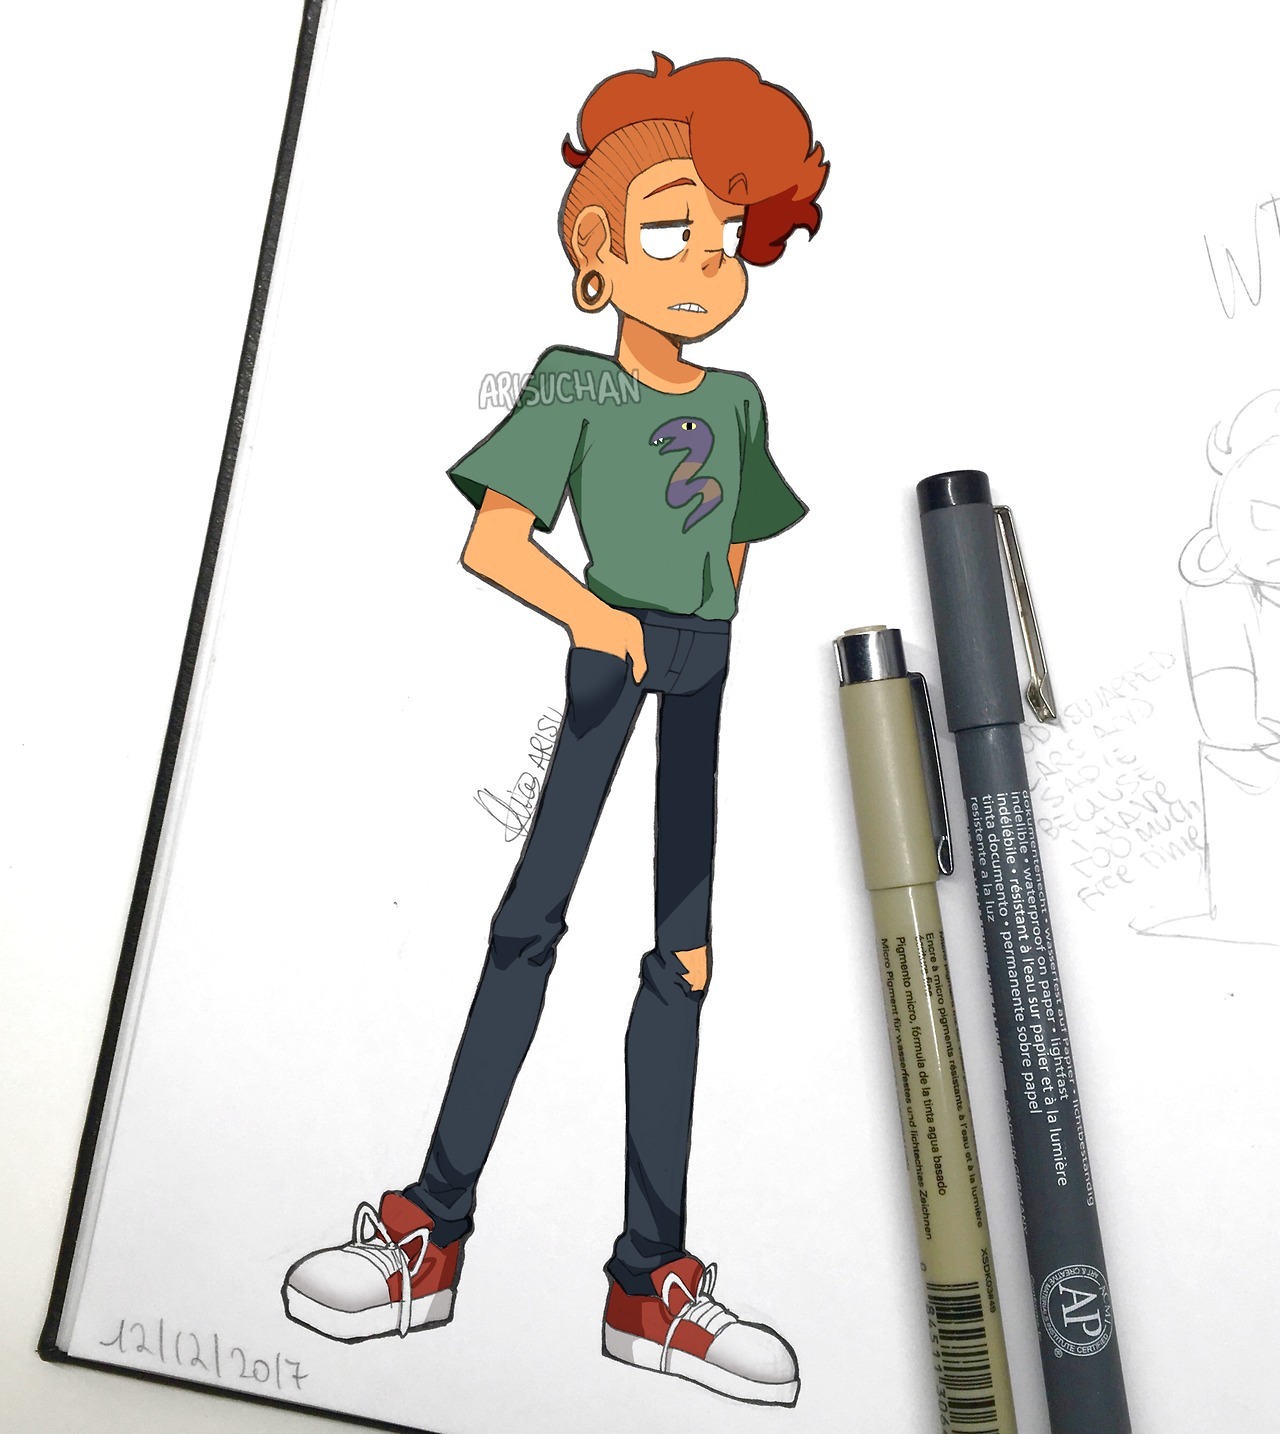 His legs just get longer every time i draw him (And btw this was colored digitally)